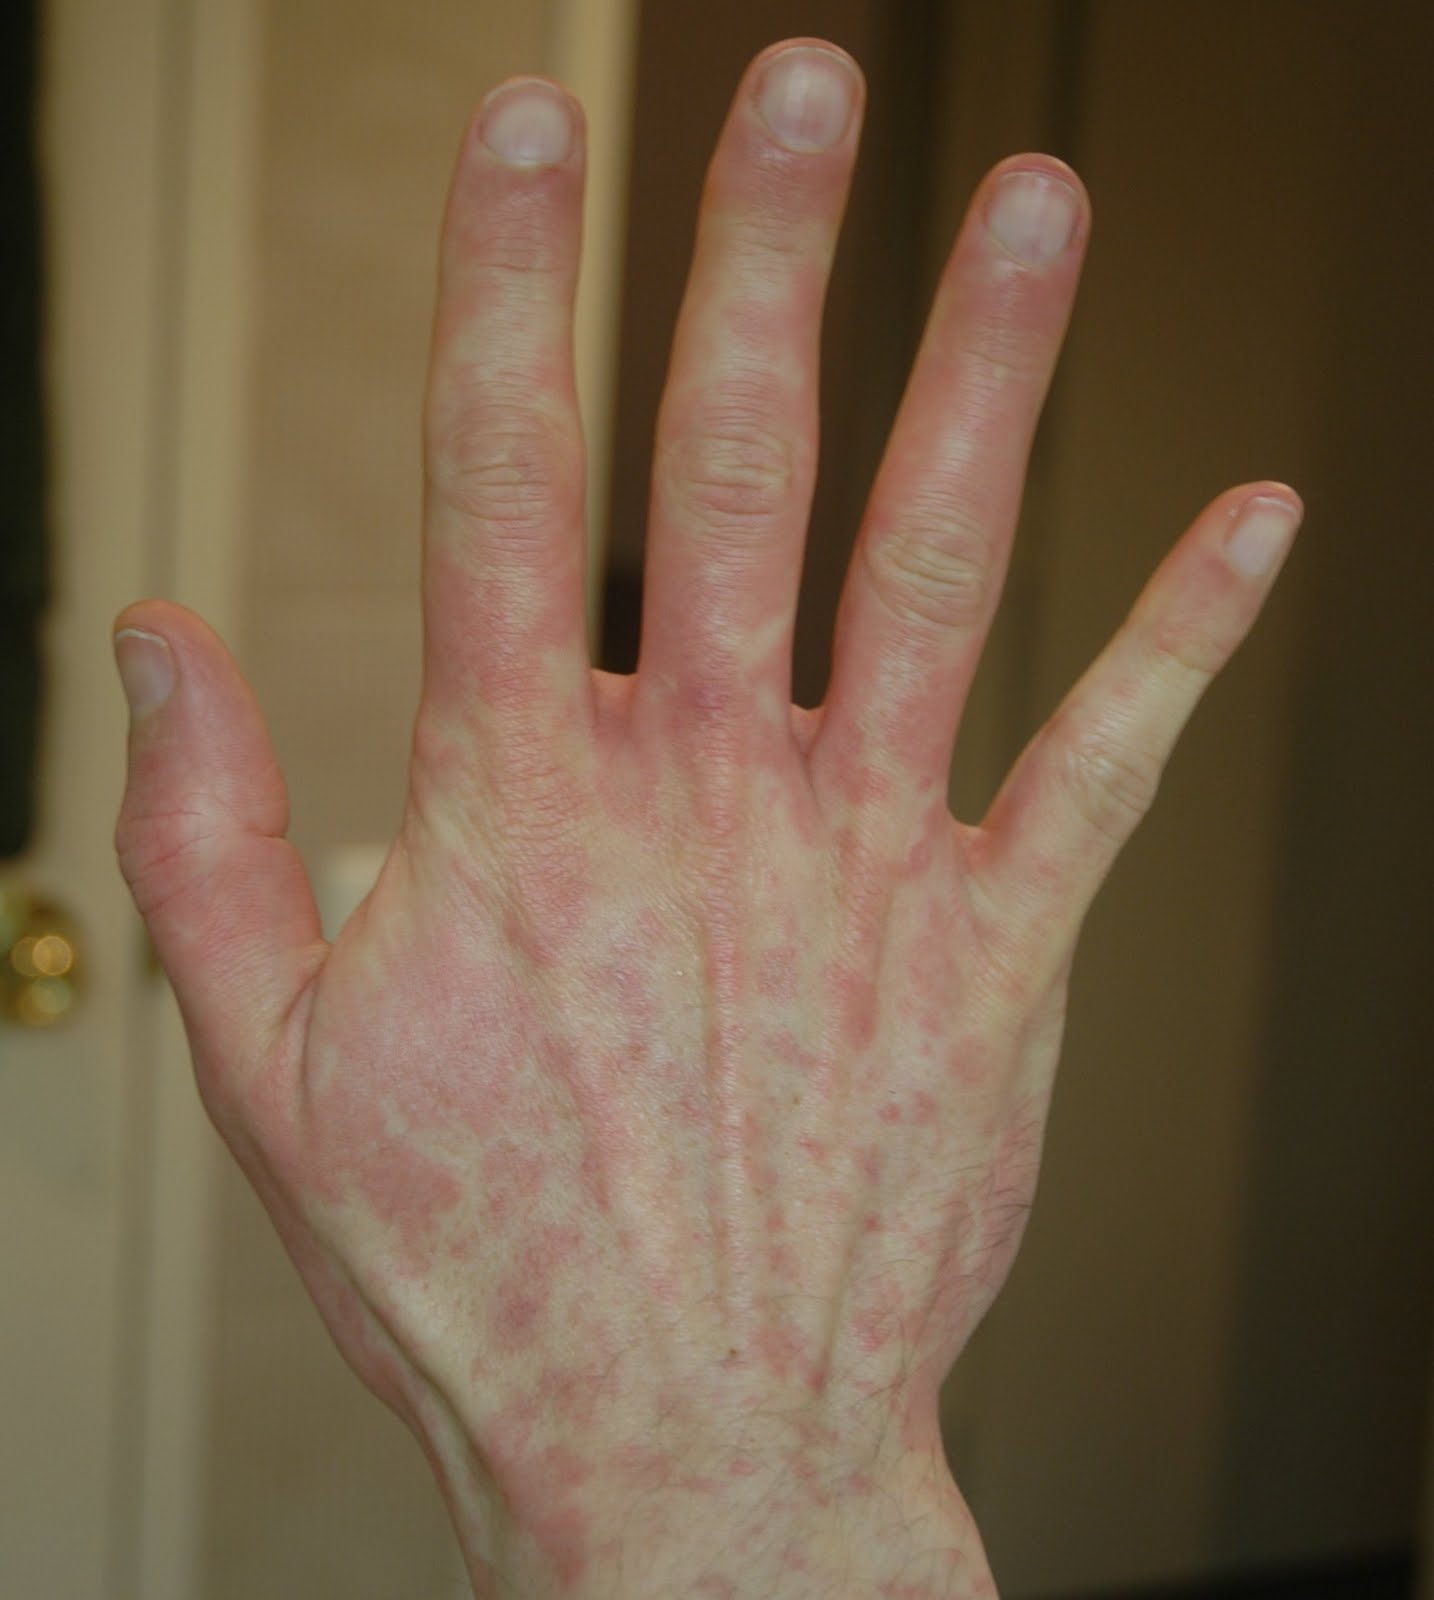 Hives Causes, Picture, & Treatment - WebMD